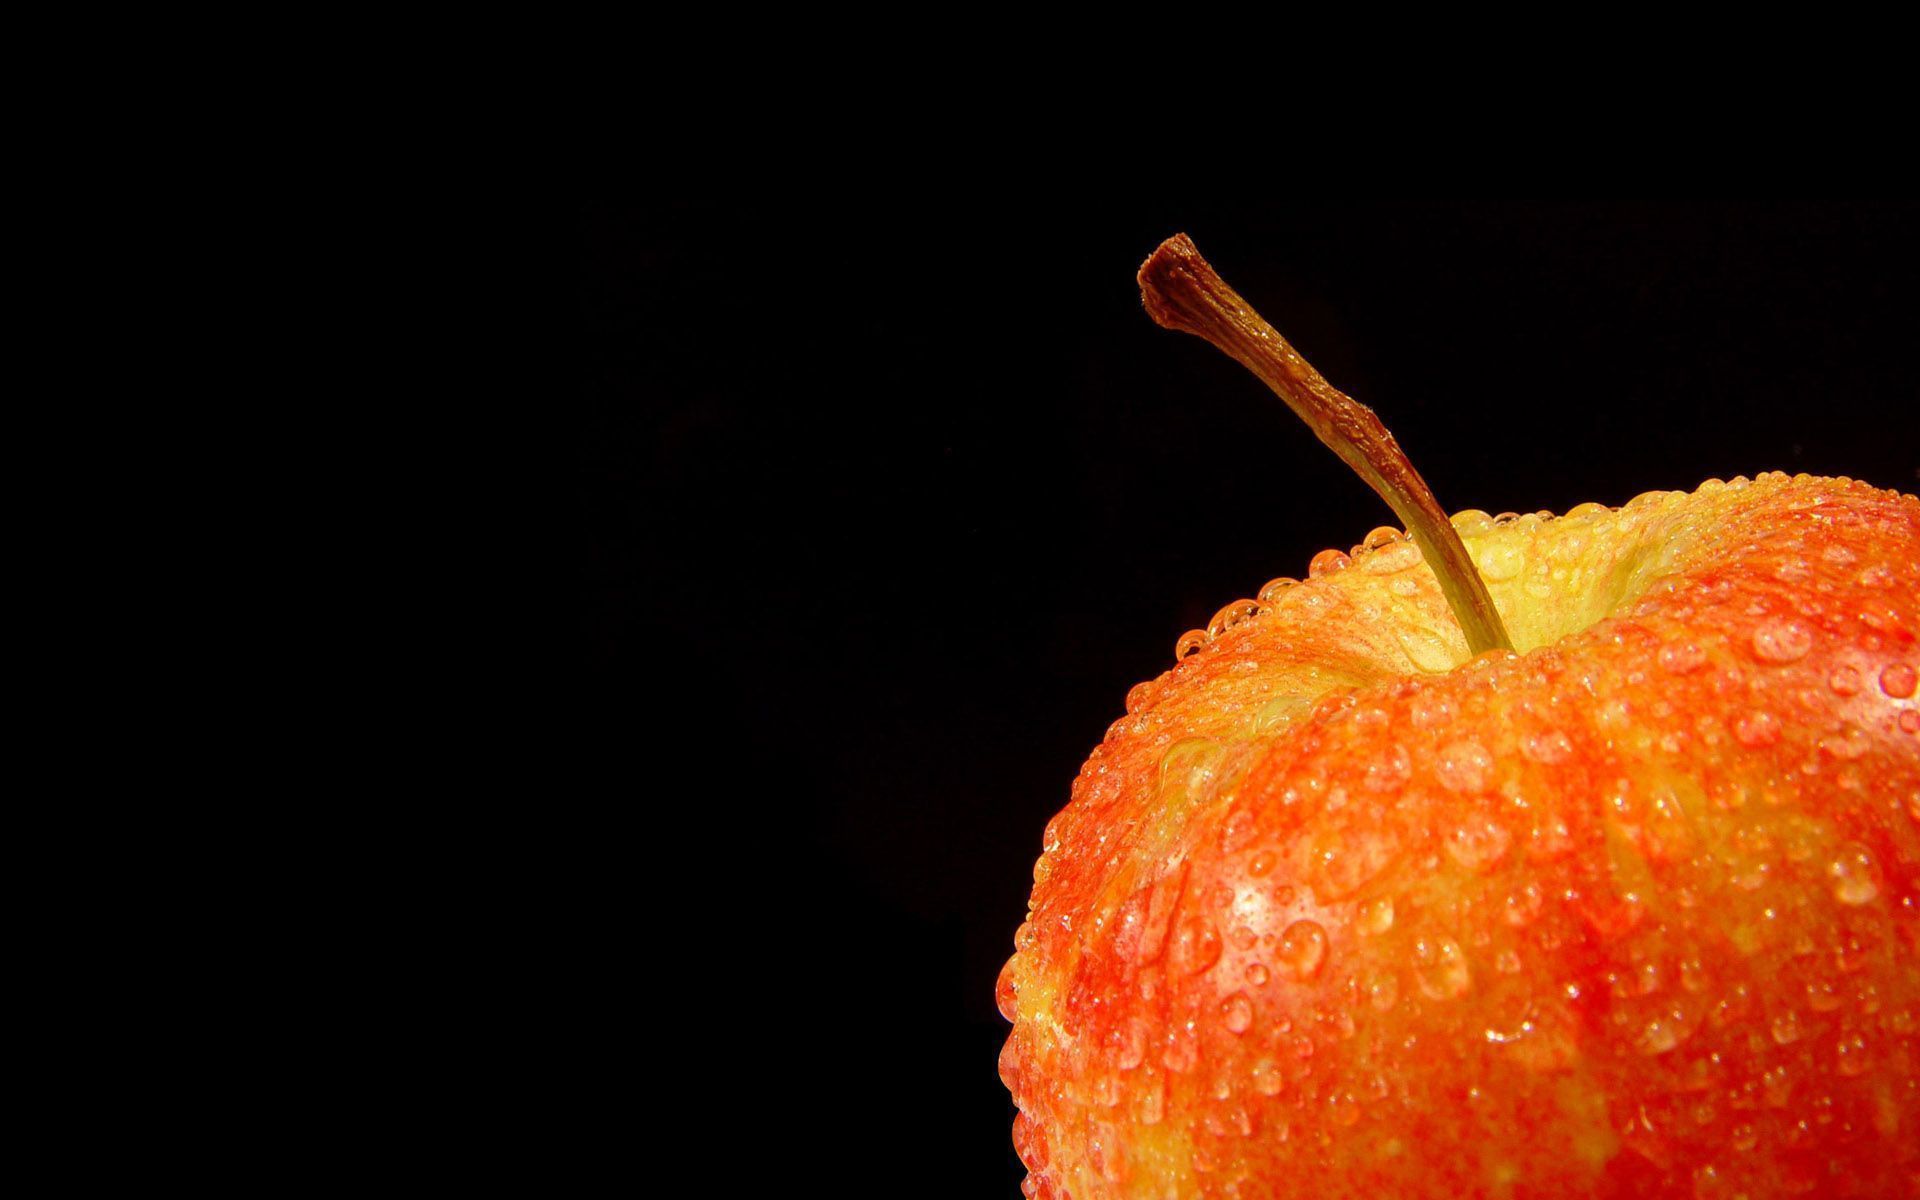 Apple on a black background wallpapers and images - wallpapers